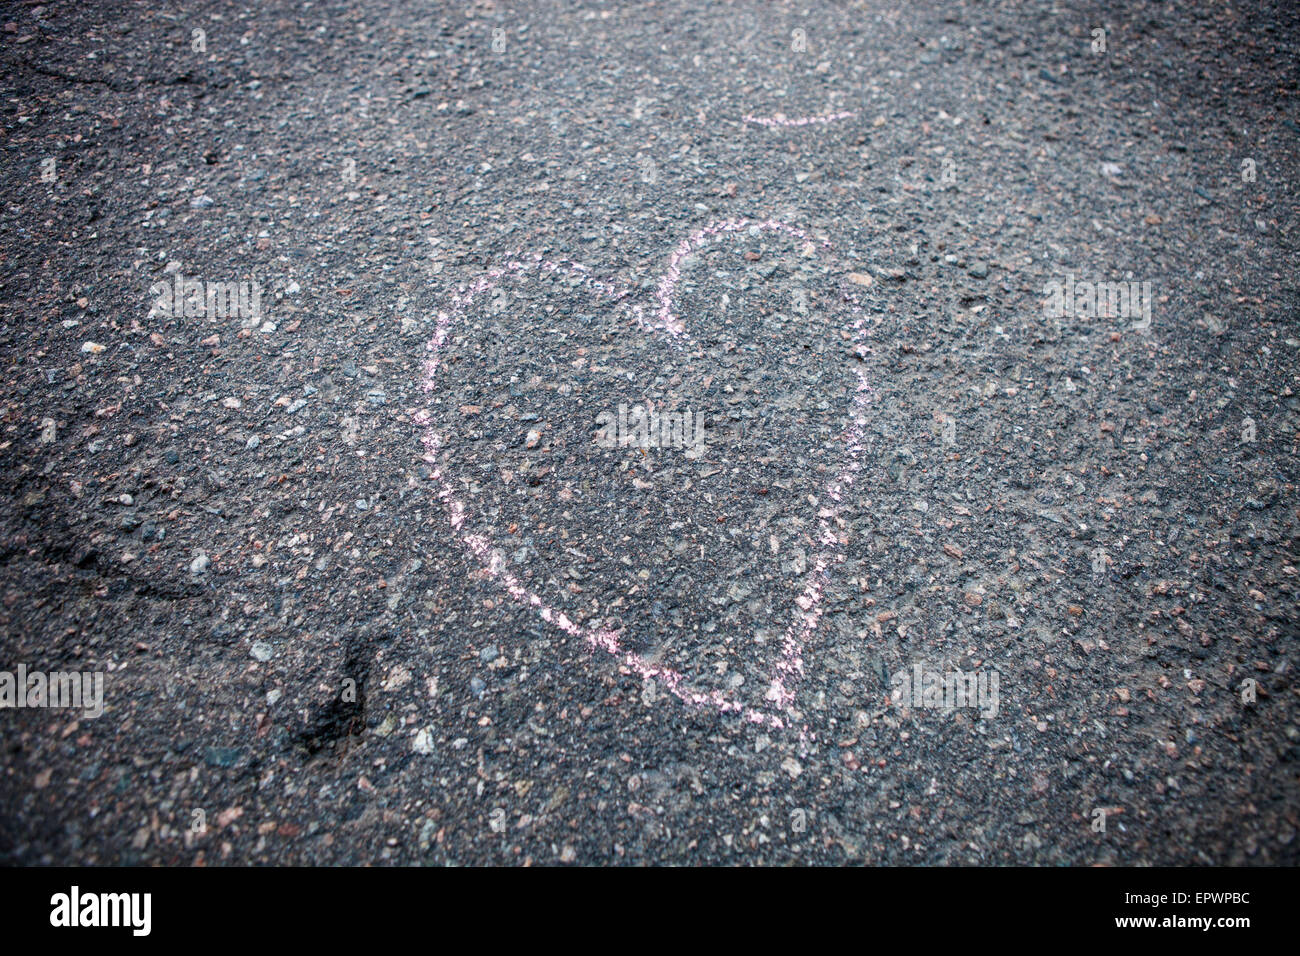 Heart shape drawind on the ground made with street chalk Stock Photo